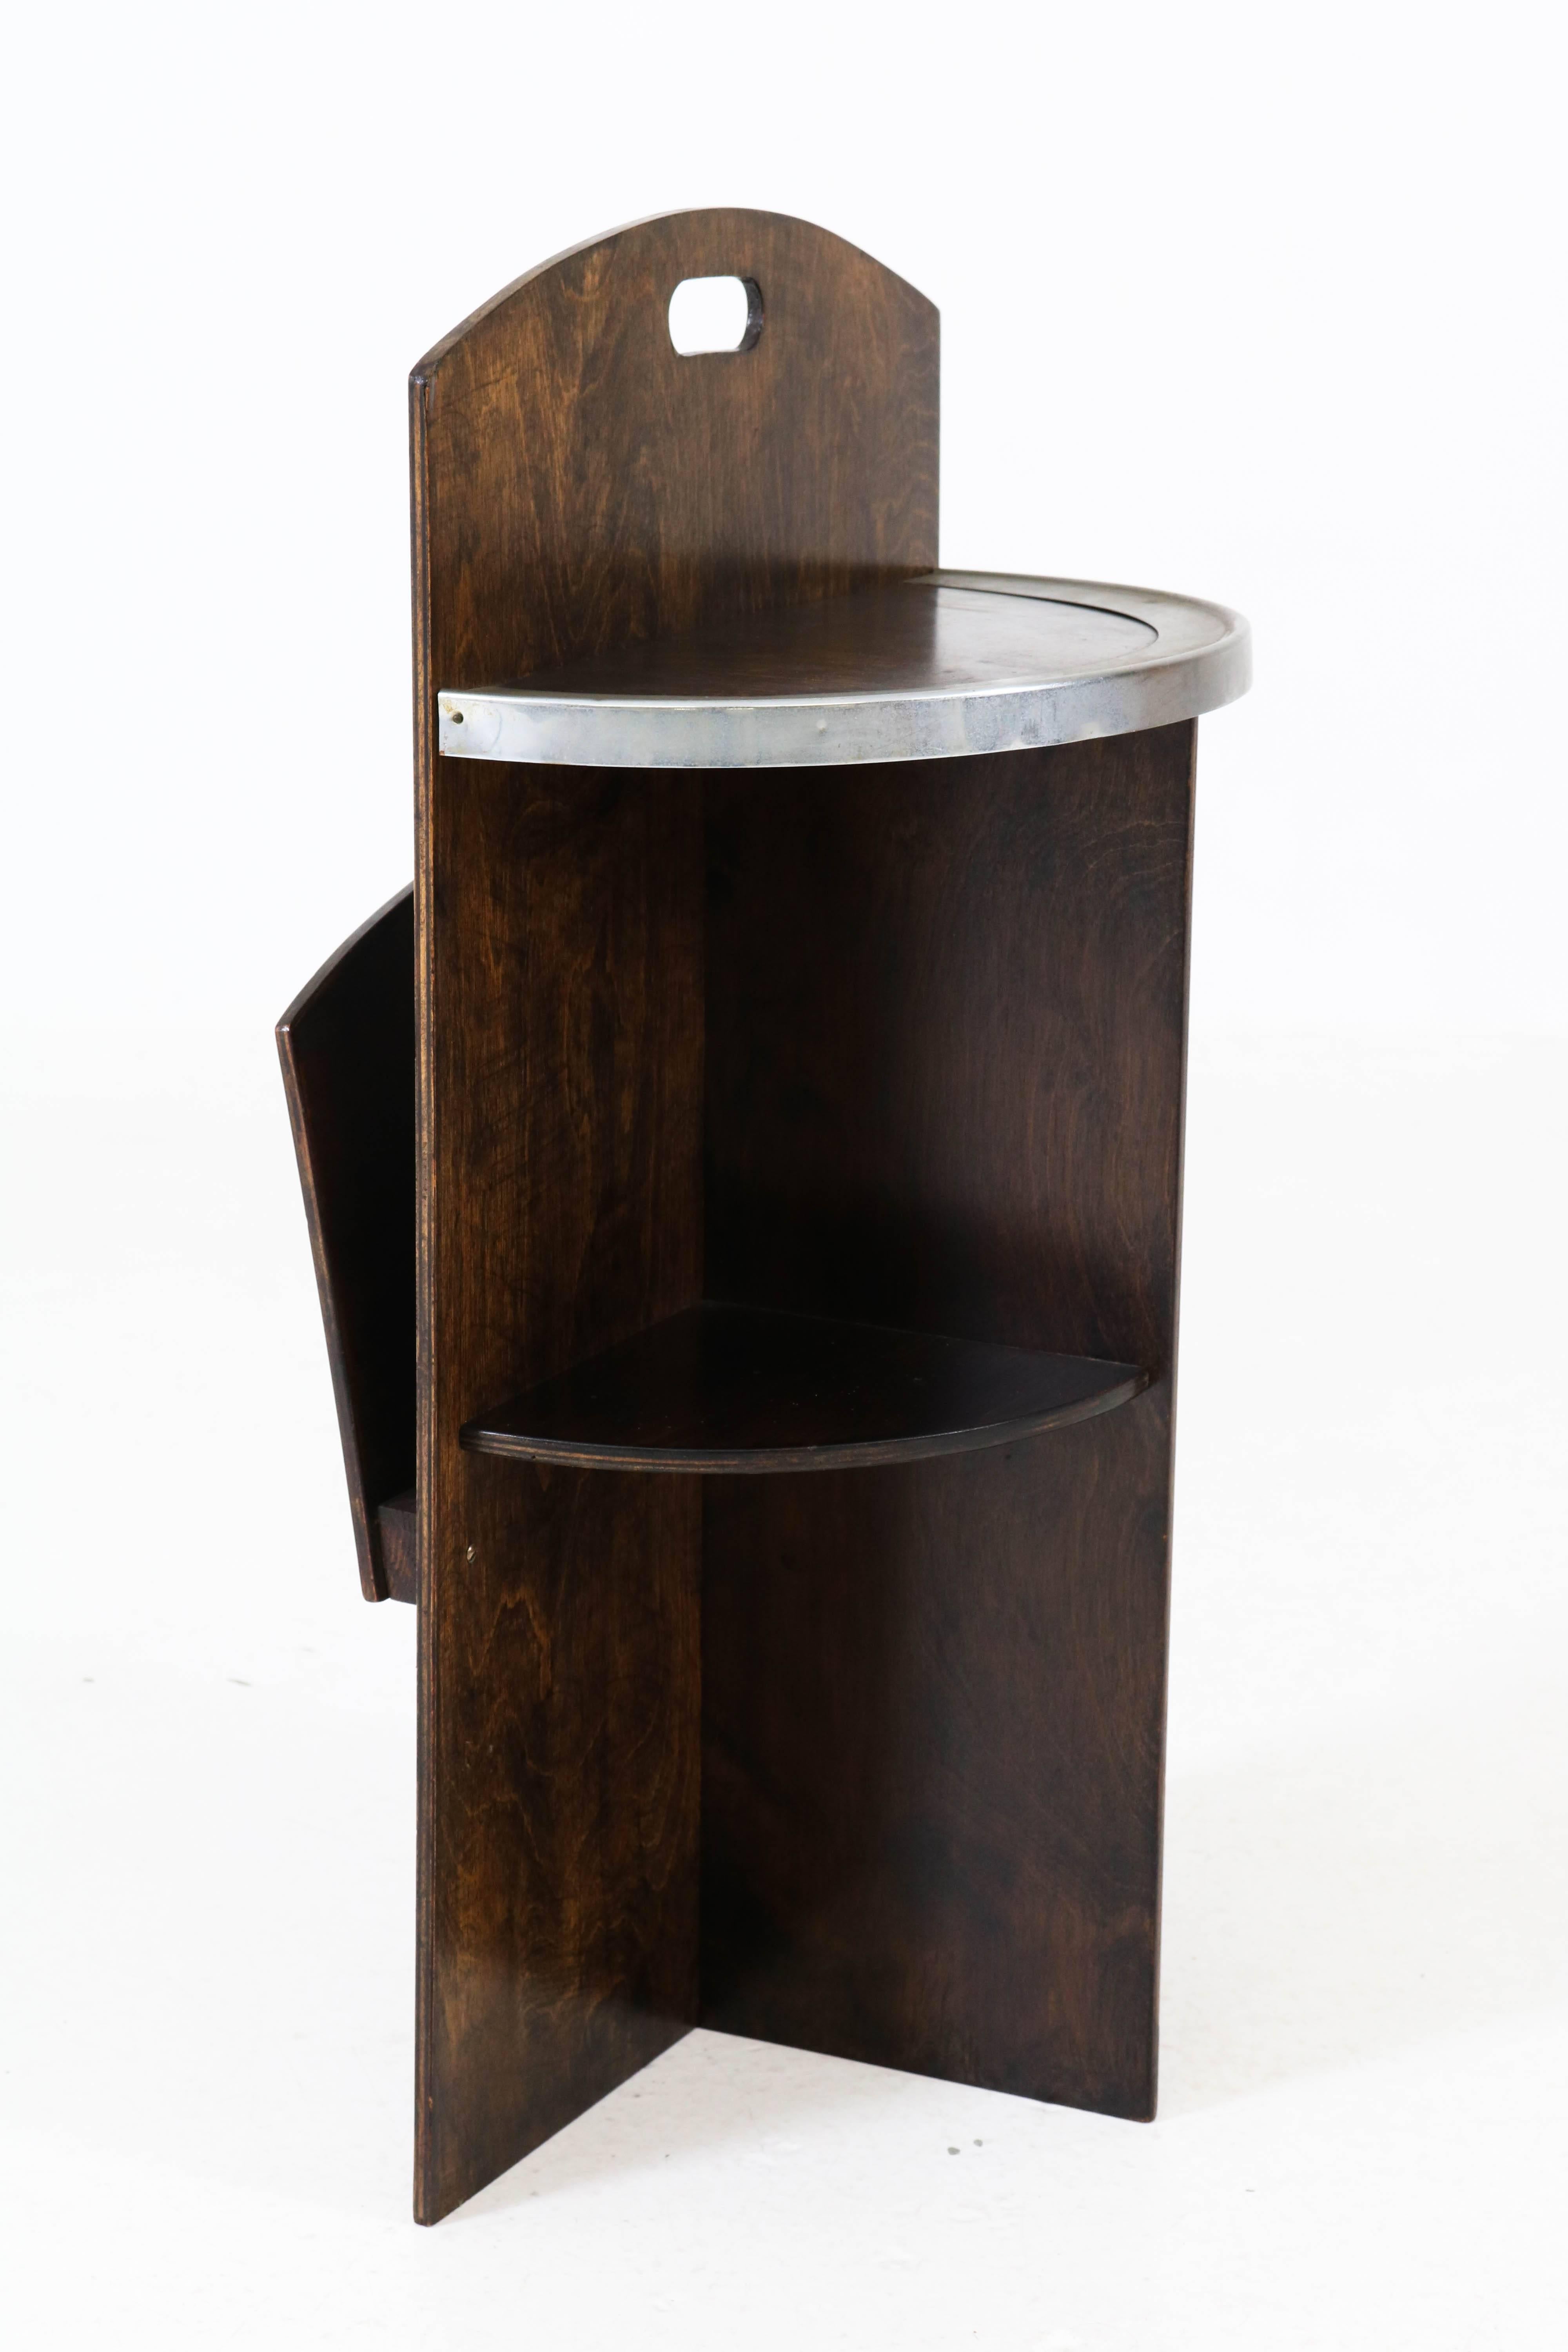 Nickel Art Deco Bauhaus Style Plywood Table or Magazine Stand, 1930s